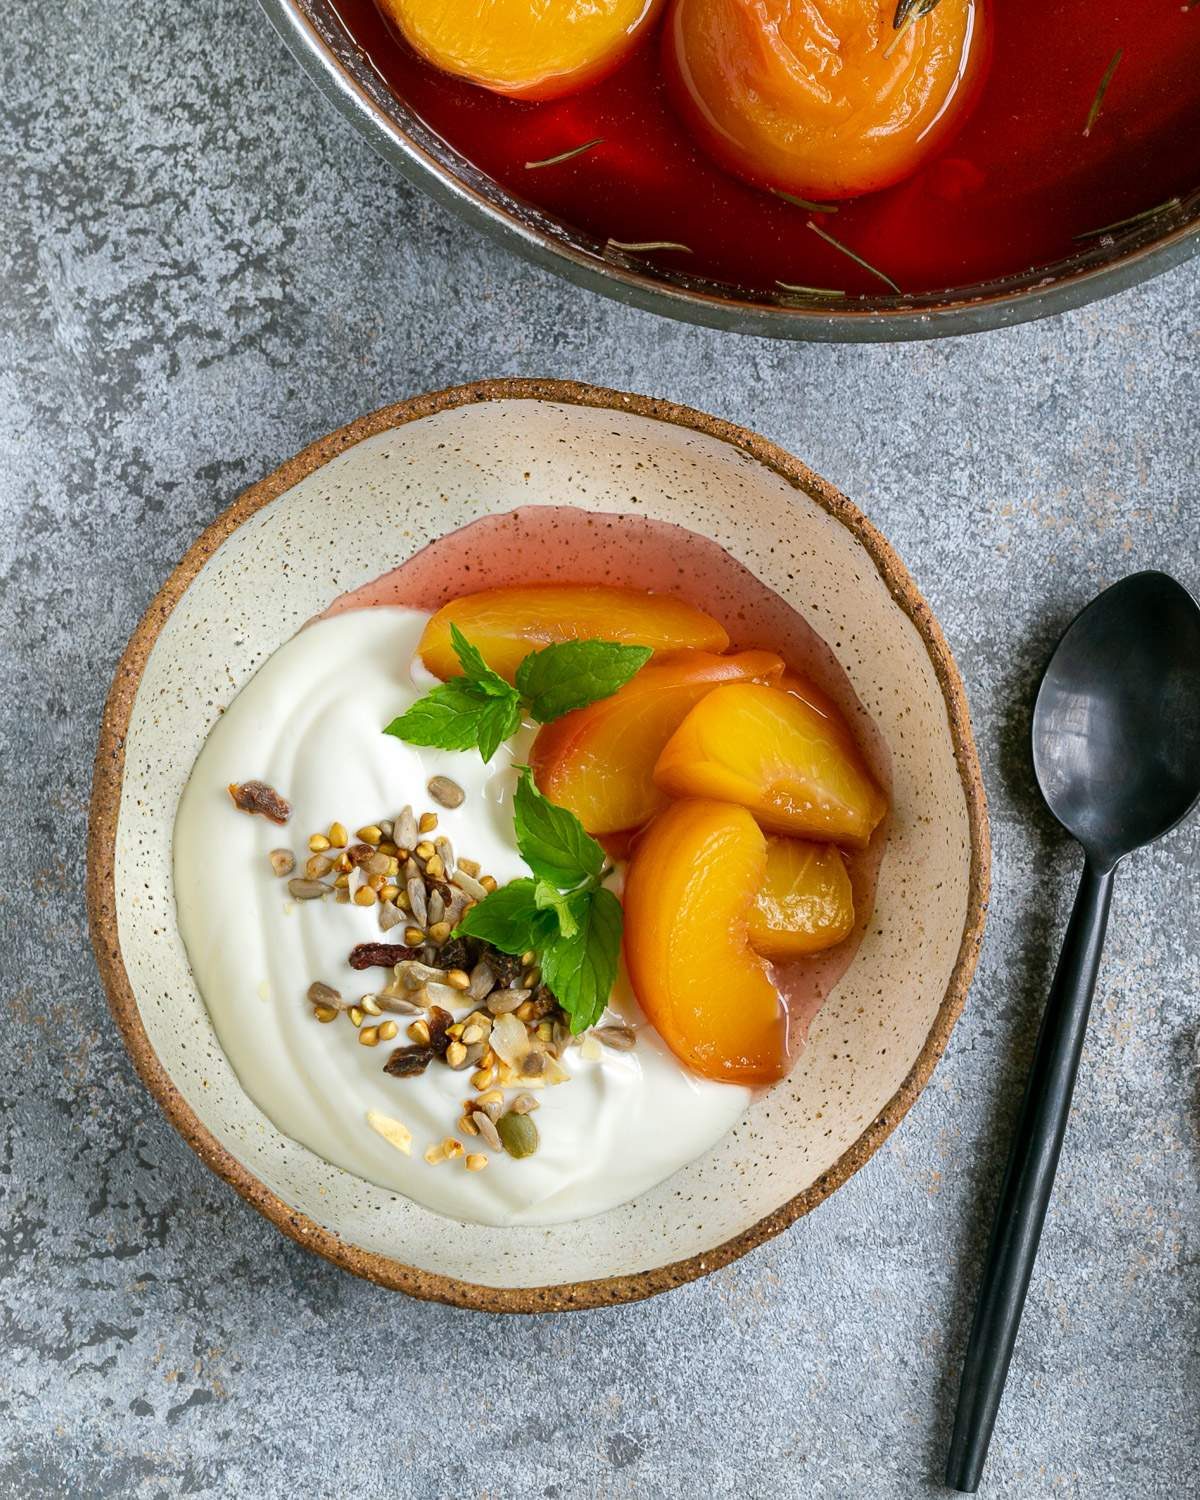 Poached peached served with yoghurt and nuts